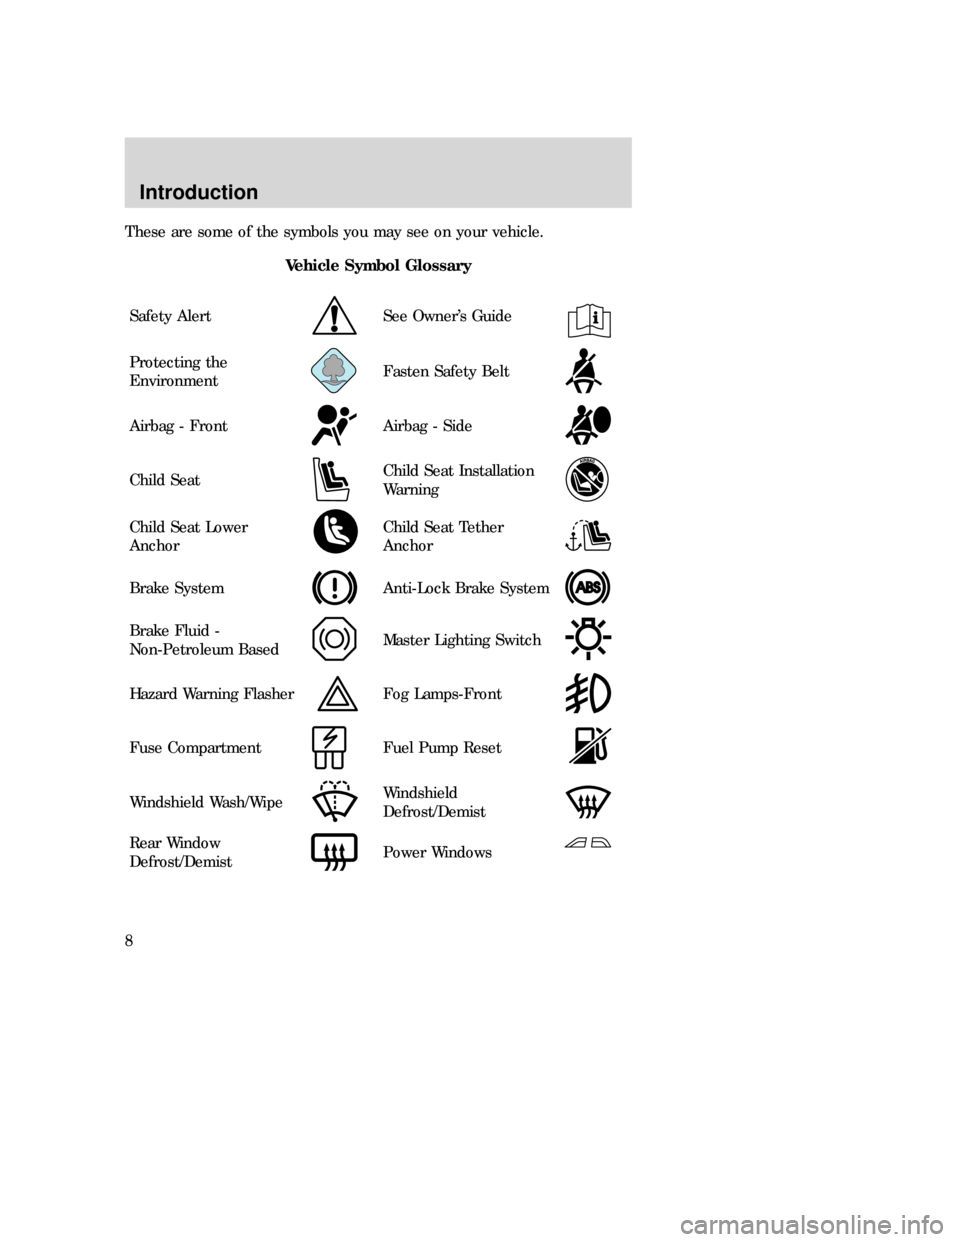 MAZDA MODEL B-SERIES 2006  Owners Manual (in English) These are some of the symbols you may see on your vehicle.
Vehicle Symbol Glossary
Safety Alert
See Owner’s Guide
Protecting the
EnvironmentFasten Safety Belt
Airbag - FrontAirbag - Side
Child SeatC